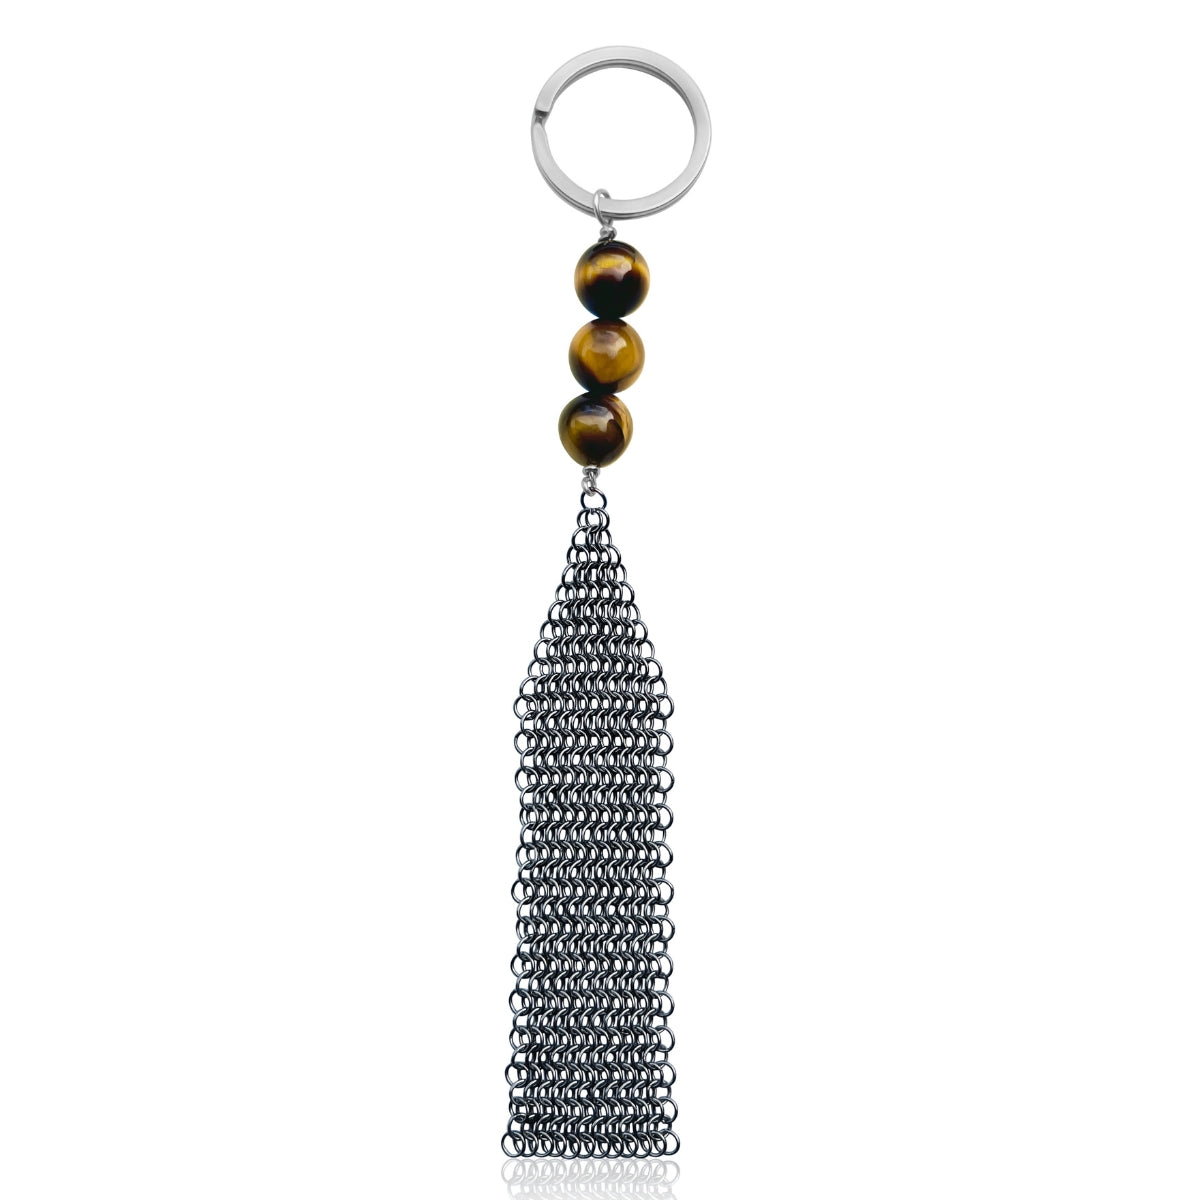 Neptunic SharkSuit Keychain with Tiger Eye - Sustainable Fashion for Ocean Lovers. Get Grounded with this Tiger Eye Keychain. Stainless Steel Chainmail connects to beautiful gemstone beads. This unisex keychain is  constructed with unused pieces of Stainless Steel Mesh from Neptunic SharkSuits. 